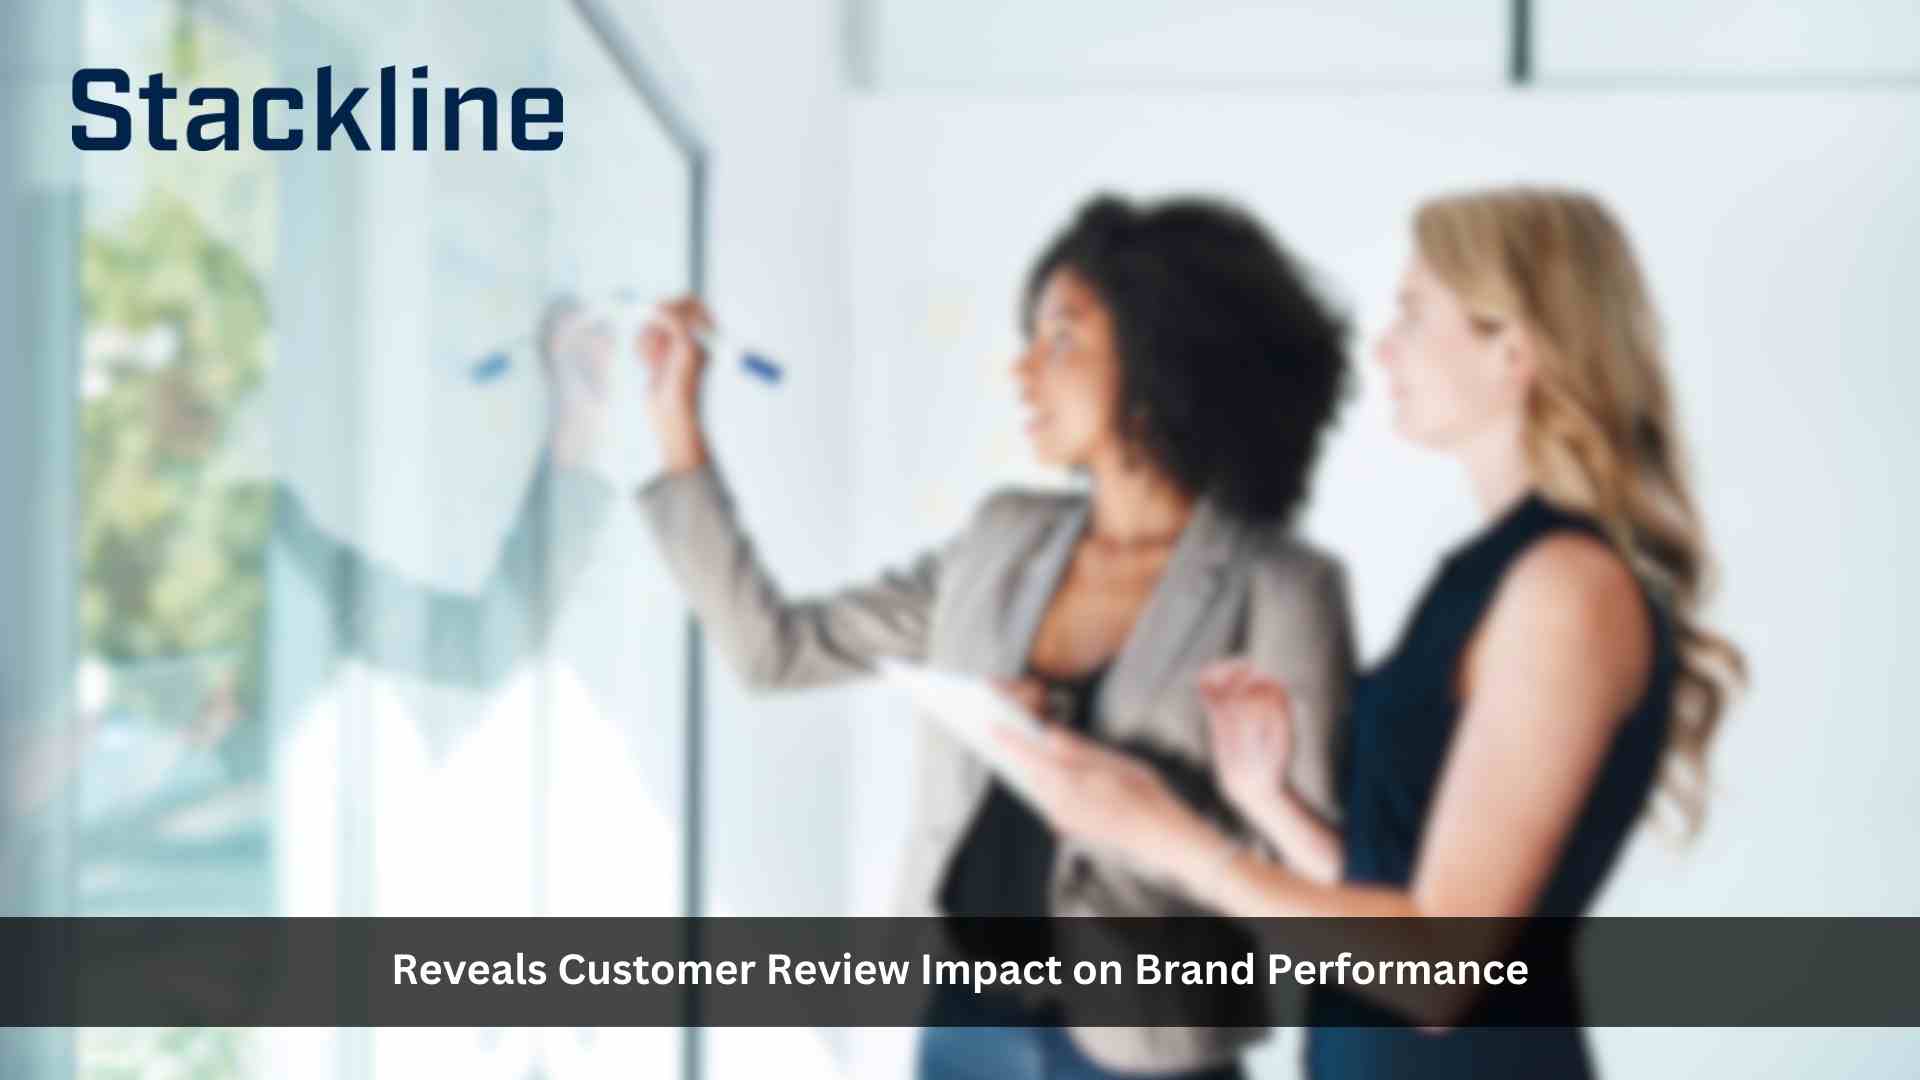 What’s the value of a customer review? New data from Stackline reveals their impact on brand performance.